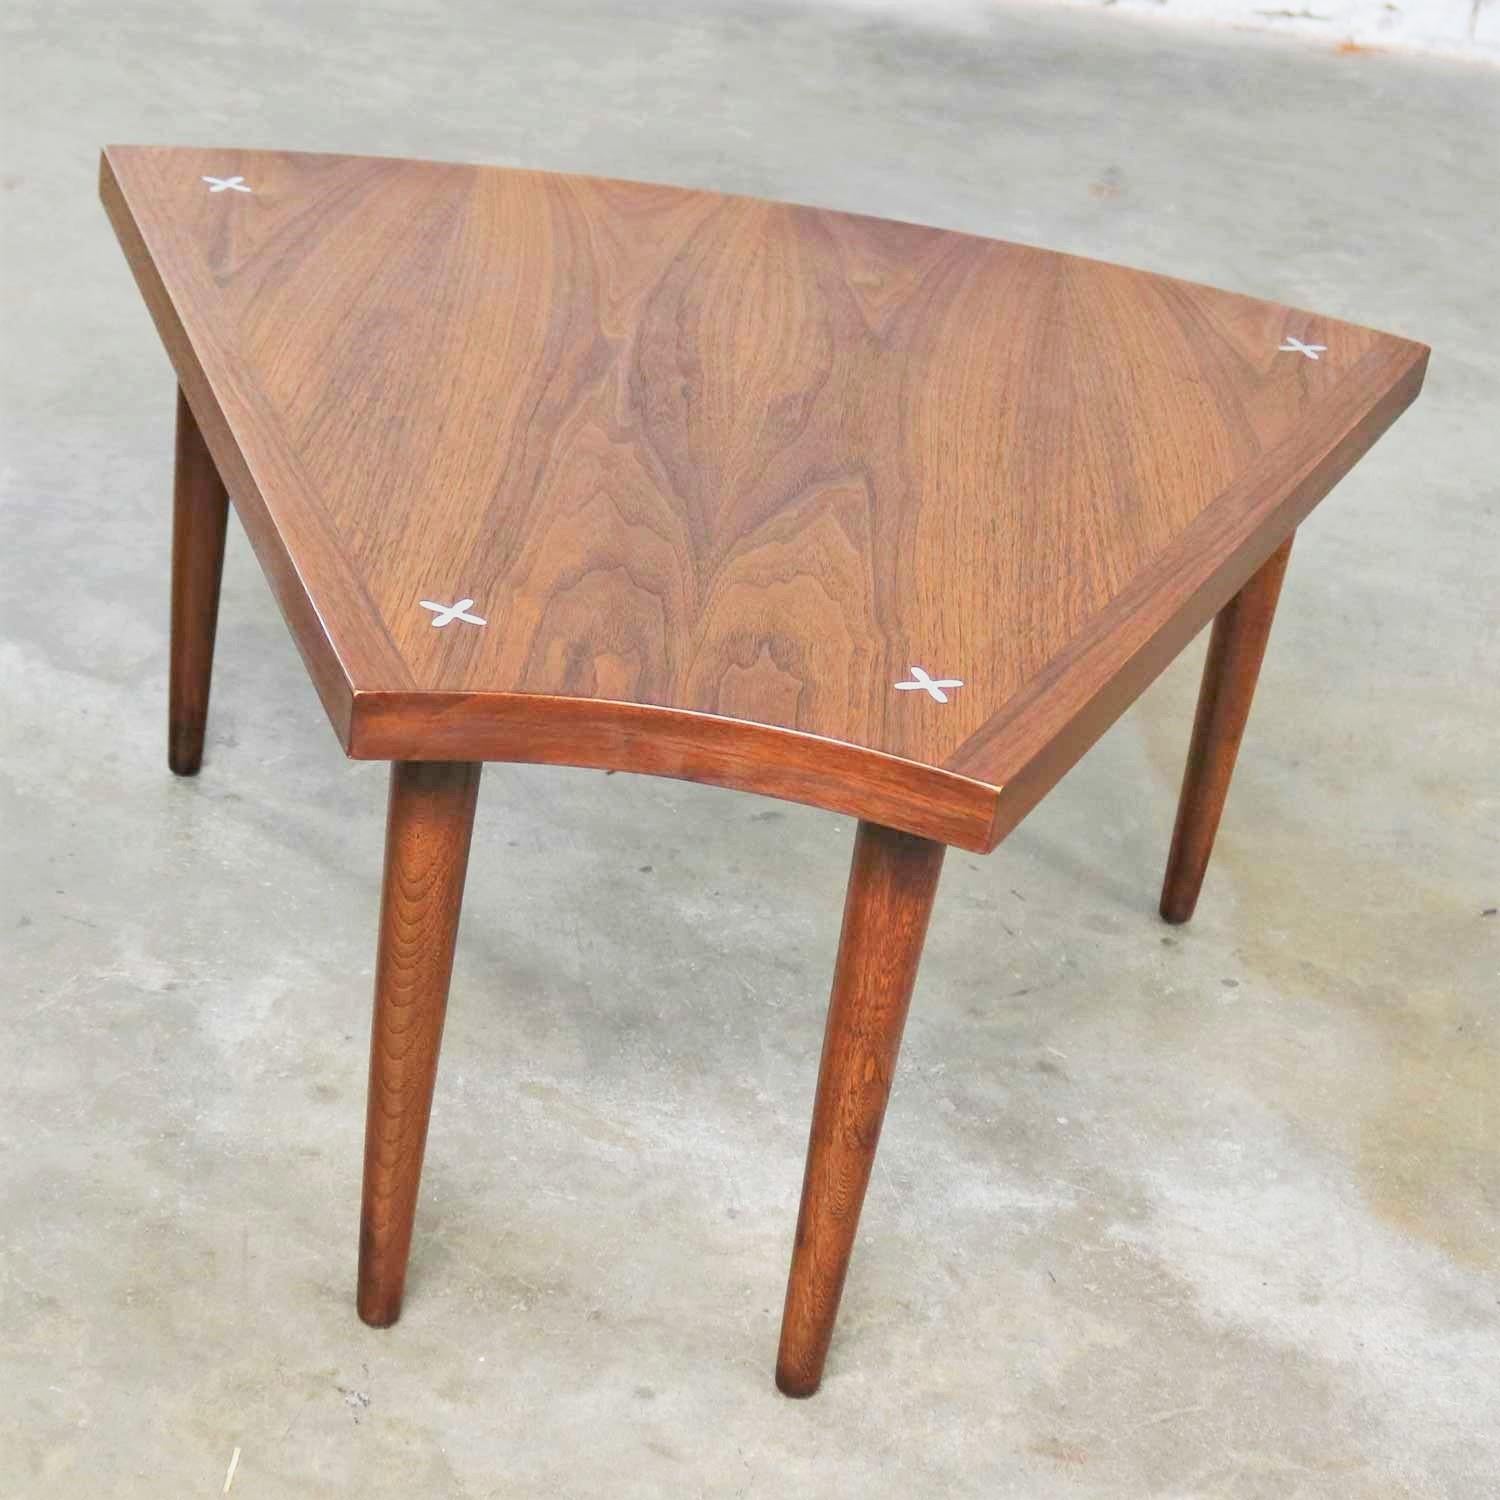 Handsome wedge or pie shape end, side, or occasional table in walnut with inlaid aluminum X’s attributed to Merton Gershun for American of Martinsville. It is in wonderful vintage condition. The top has been restored and is beautiful, but it still